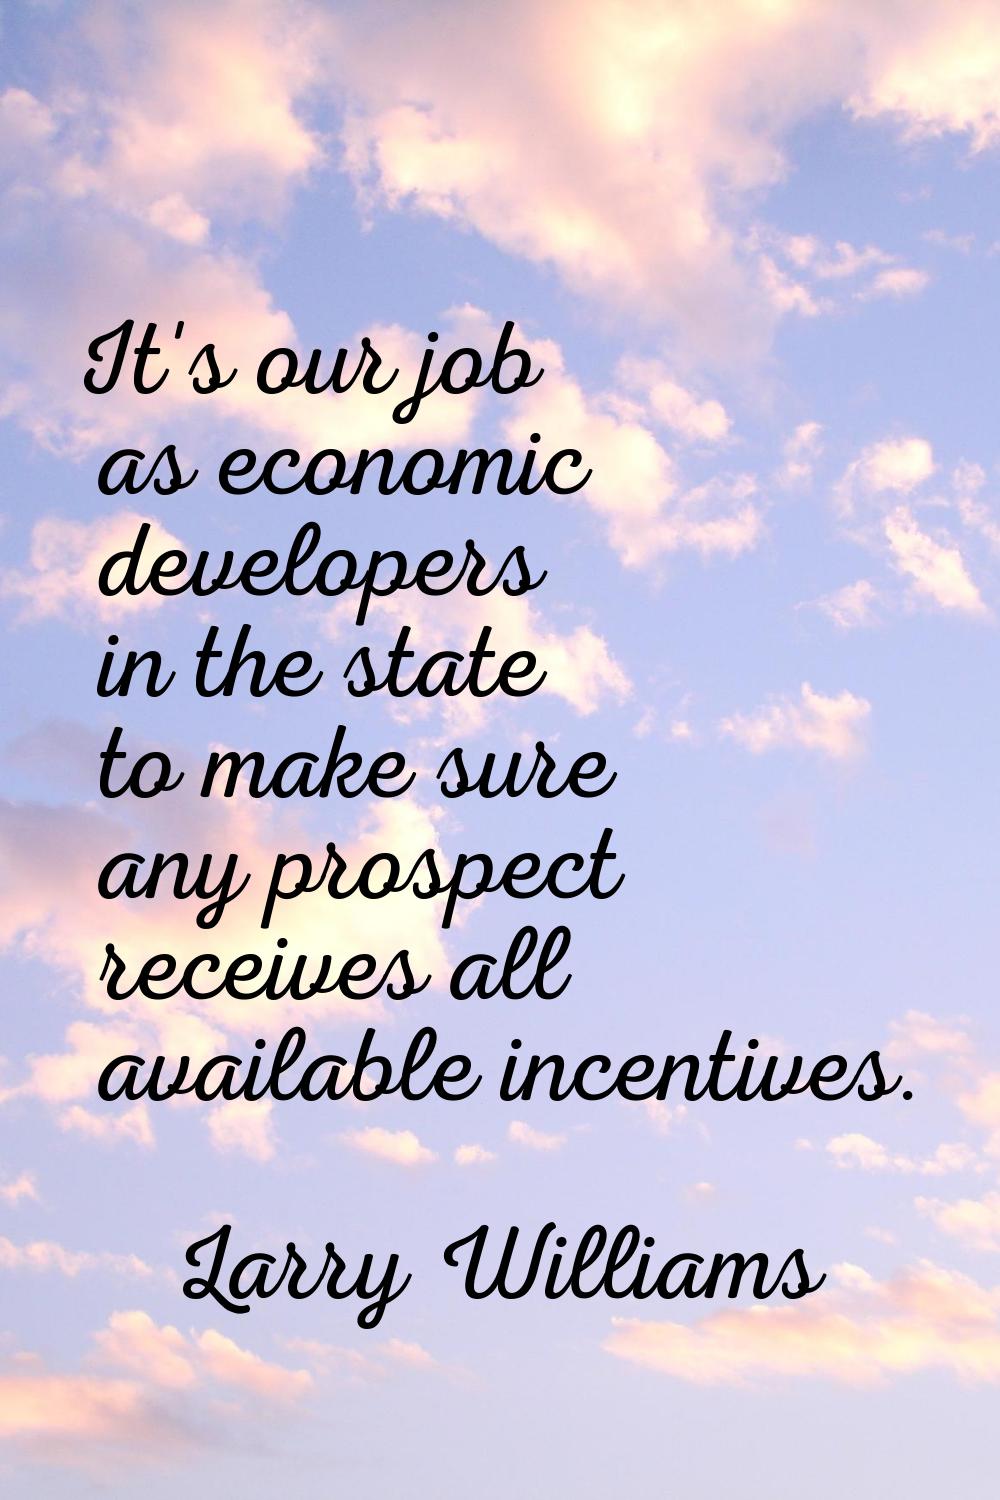 It's our job as economic developers in the state to make sure any prospect receives all available i